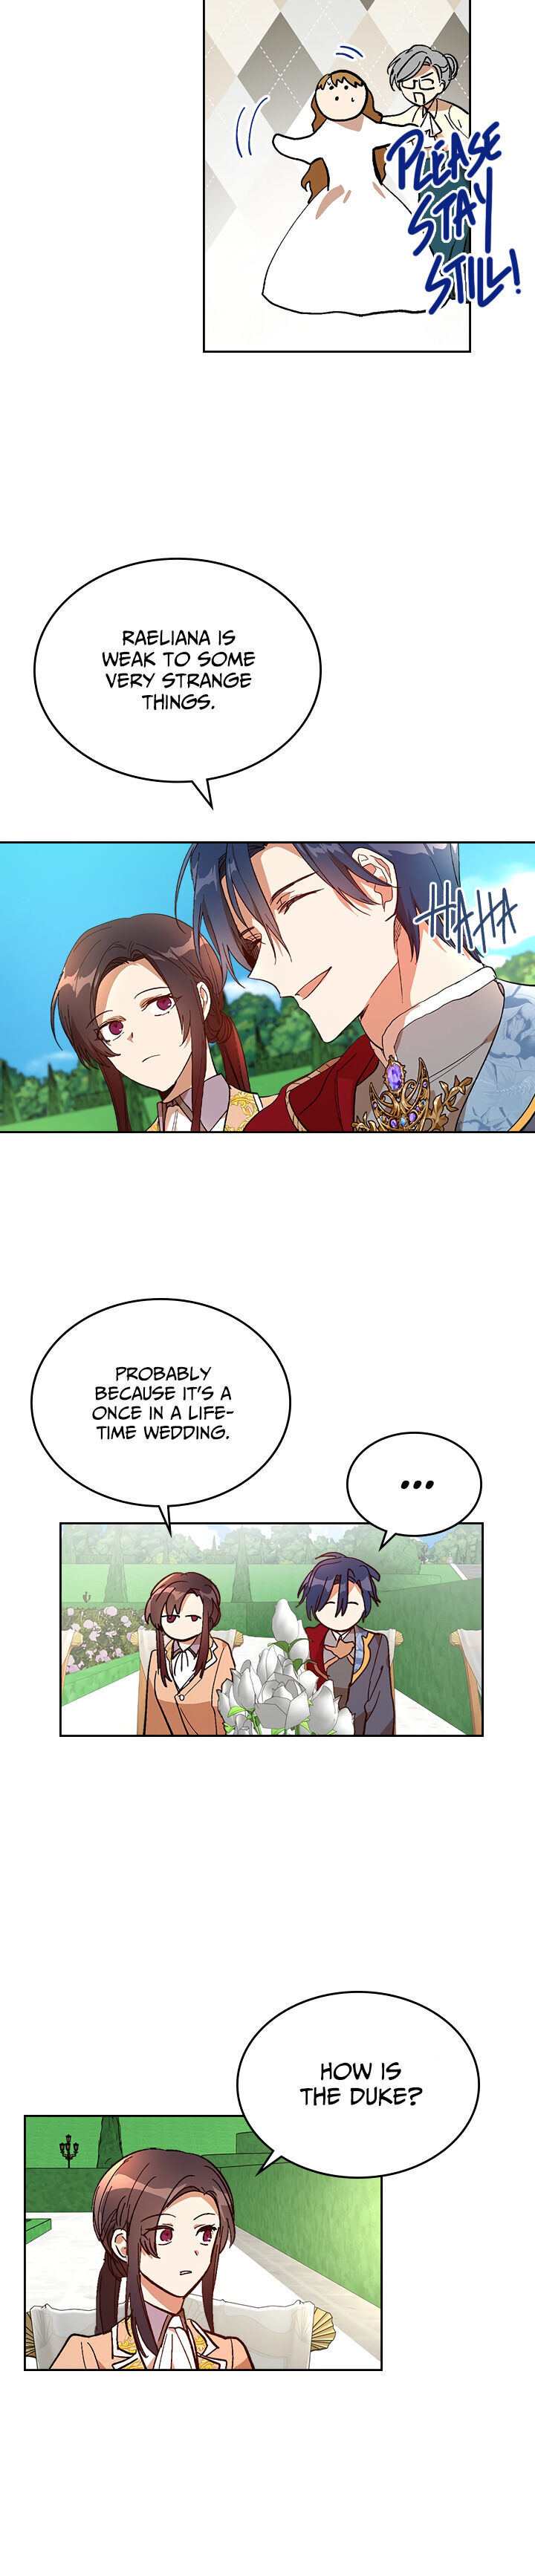 The Reason Why Raeliana Ended up at the Duke’s Mansion - Chapter 156 Page 3